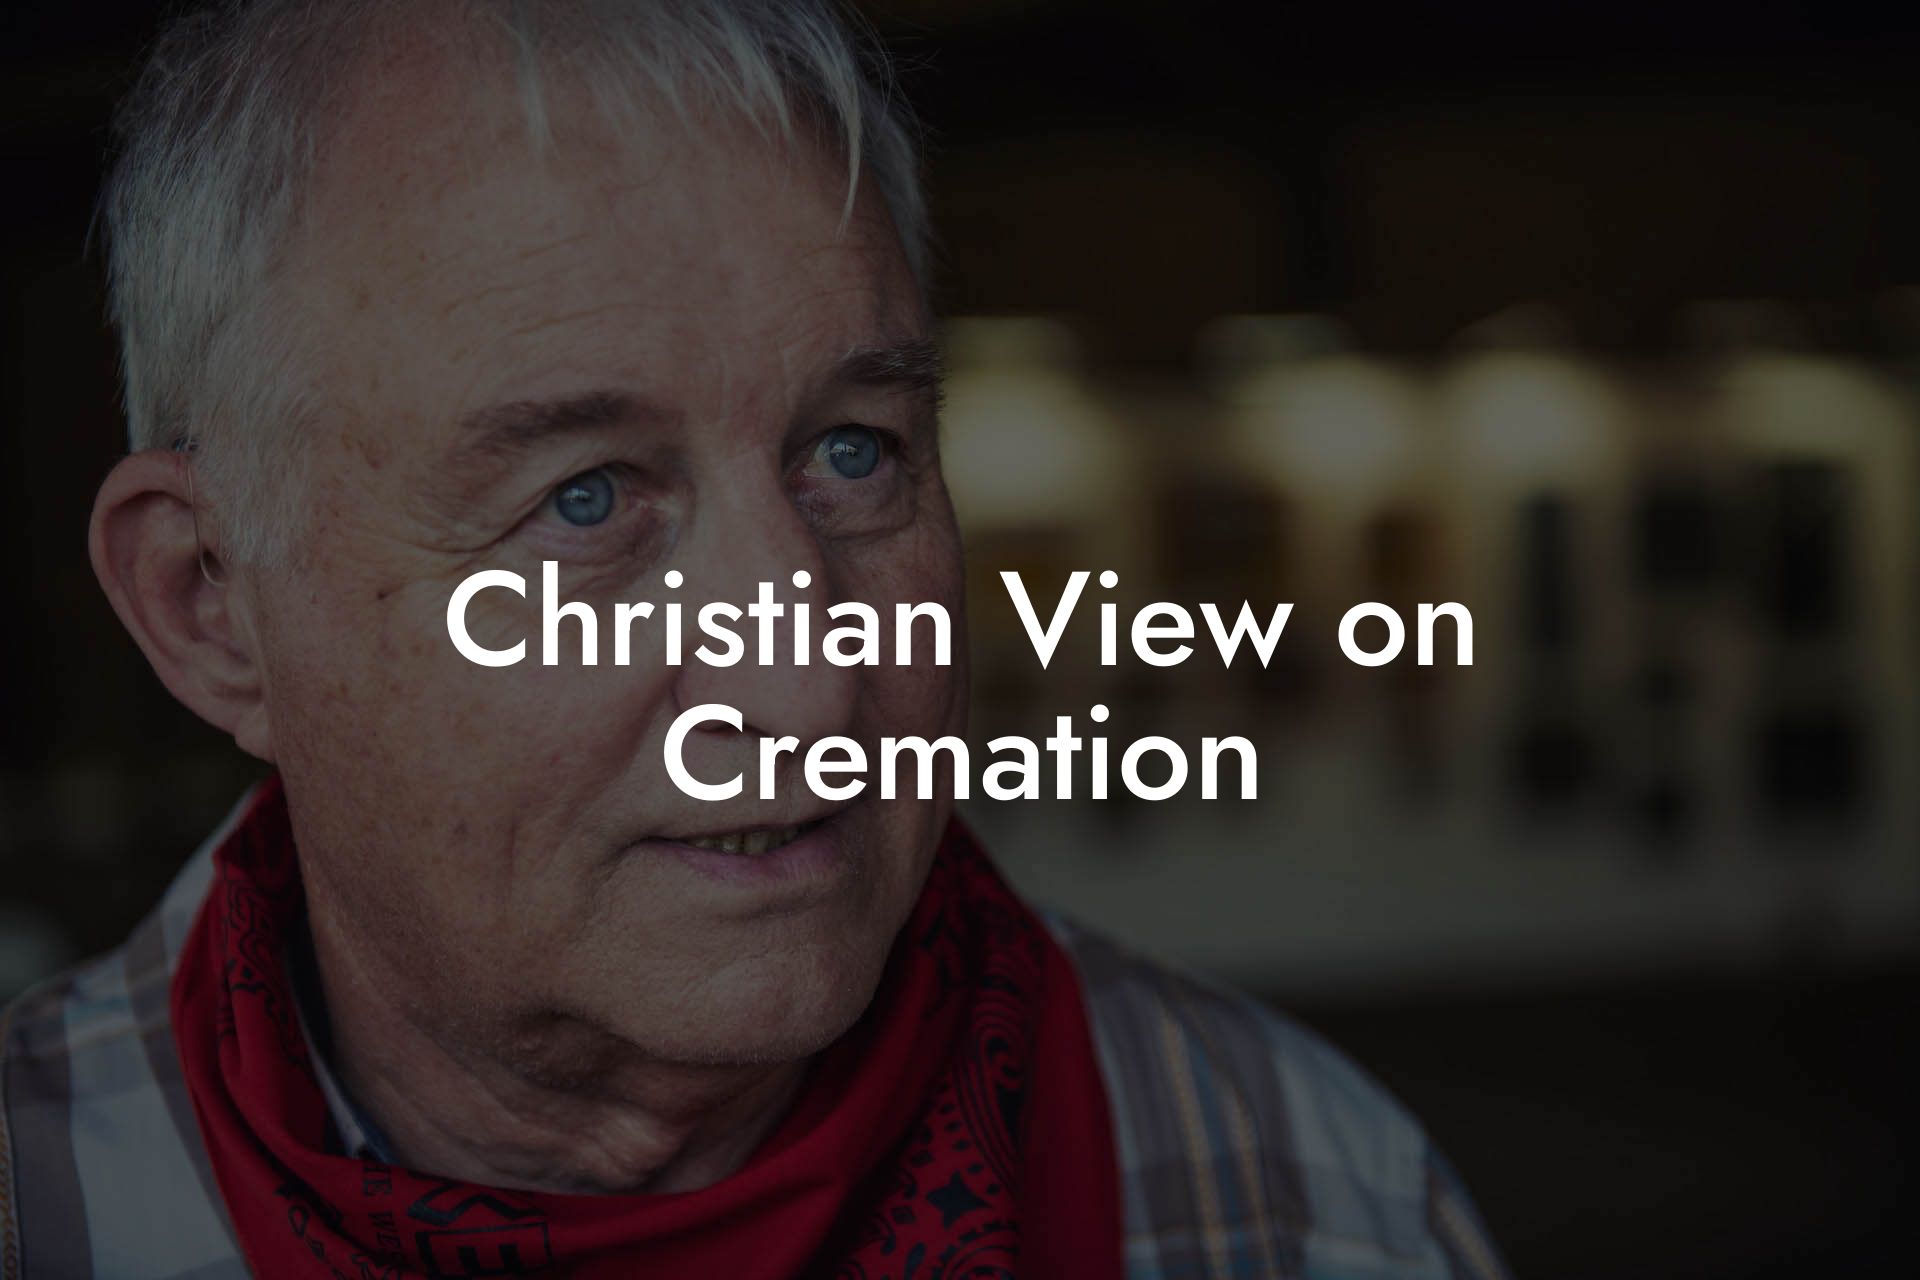 Christian View on Cremation